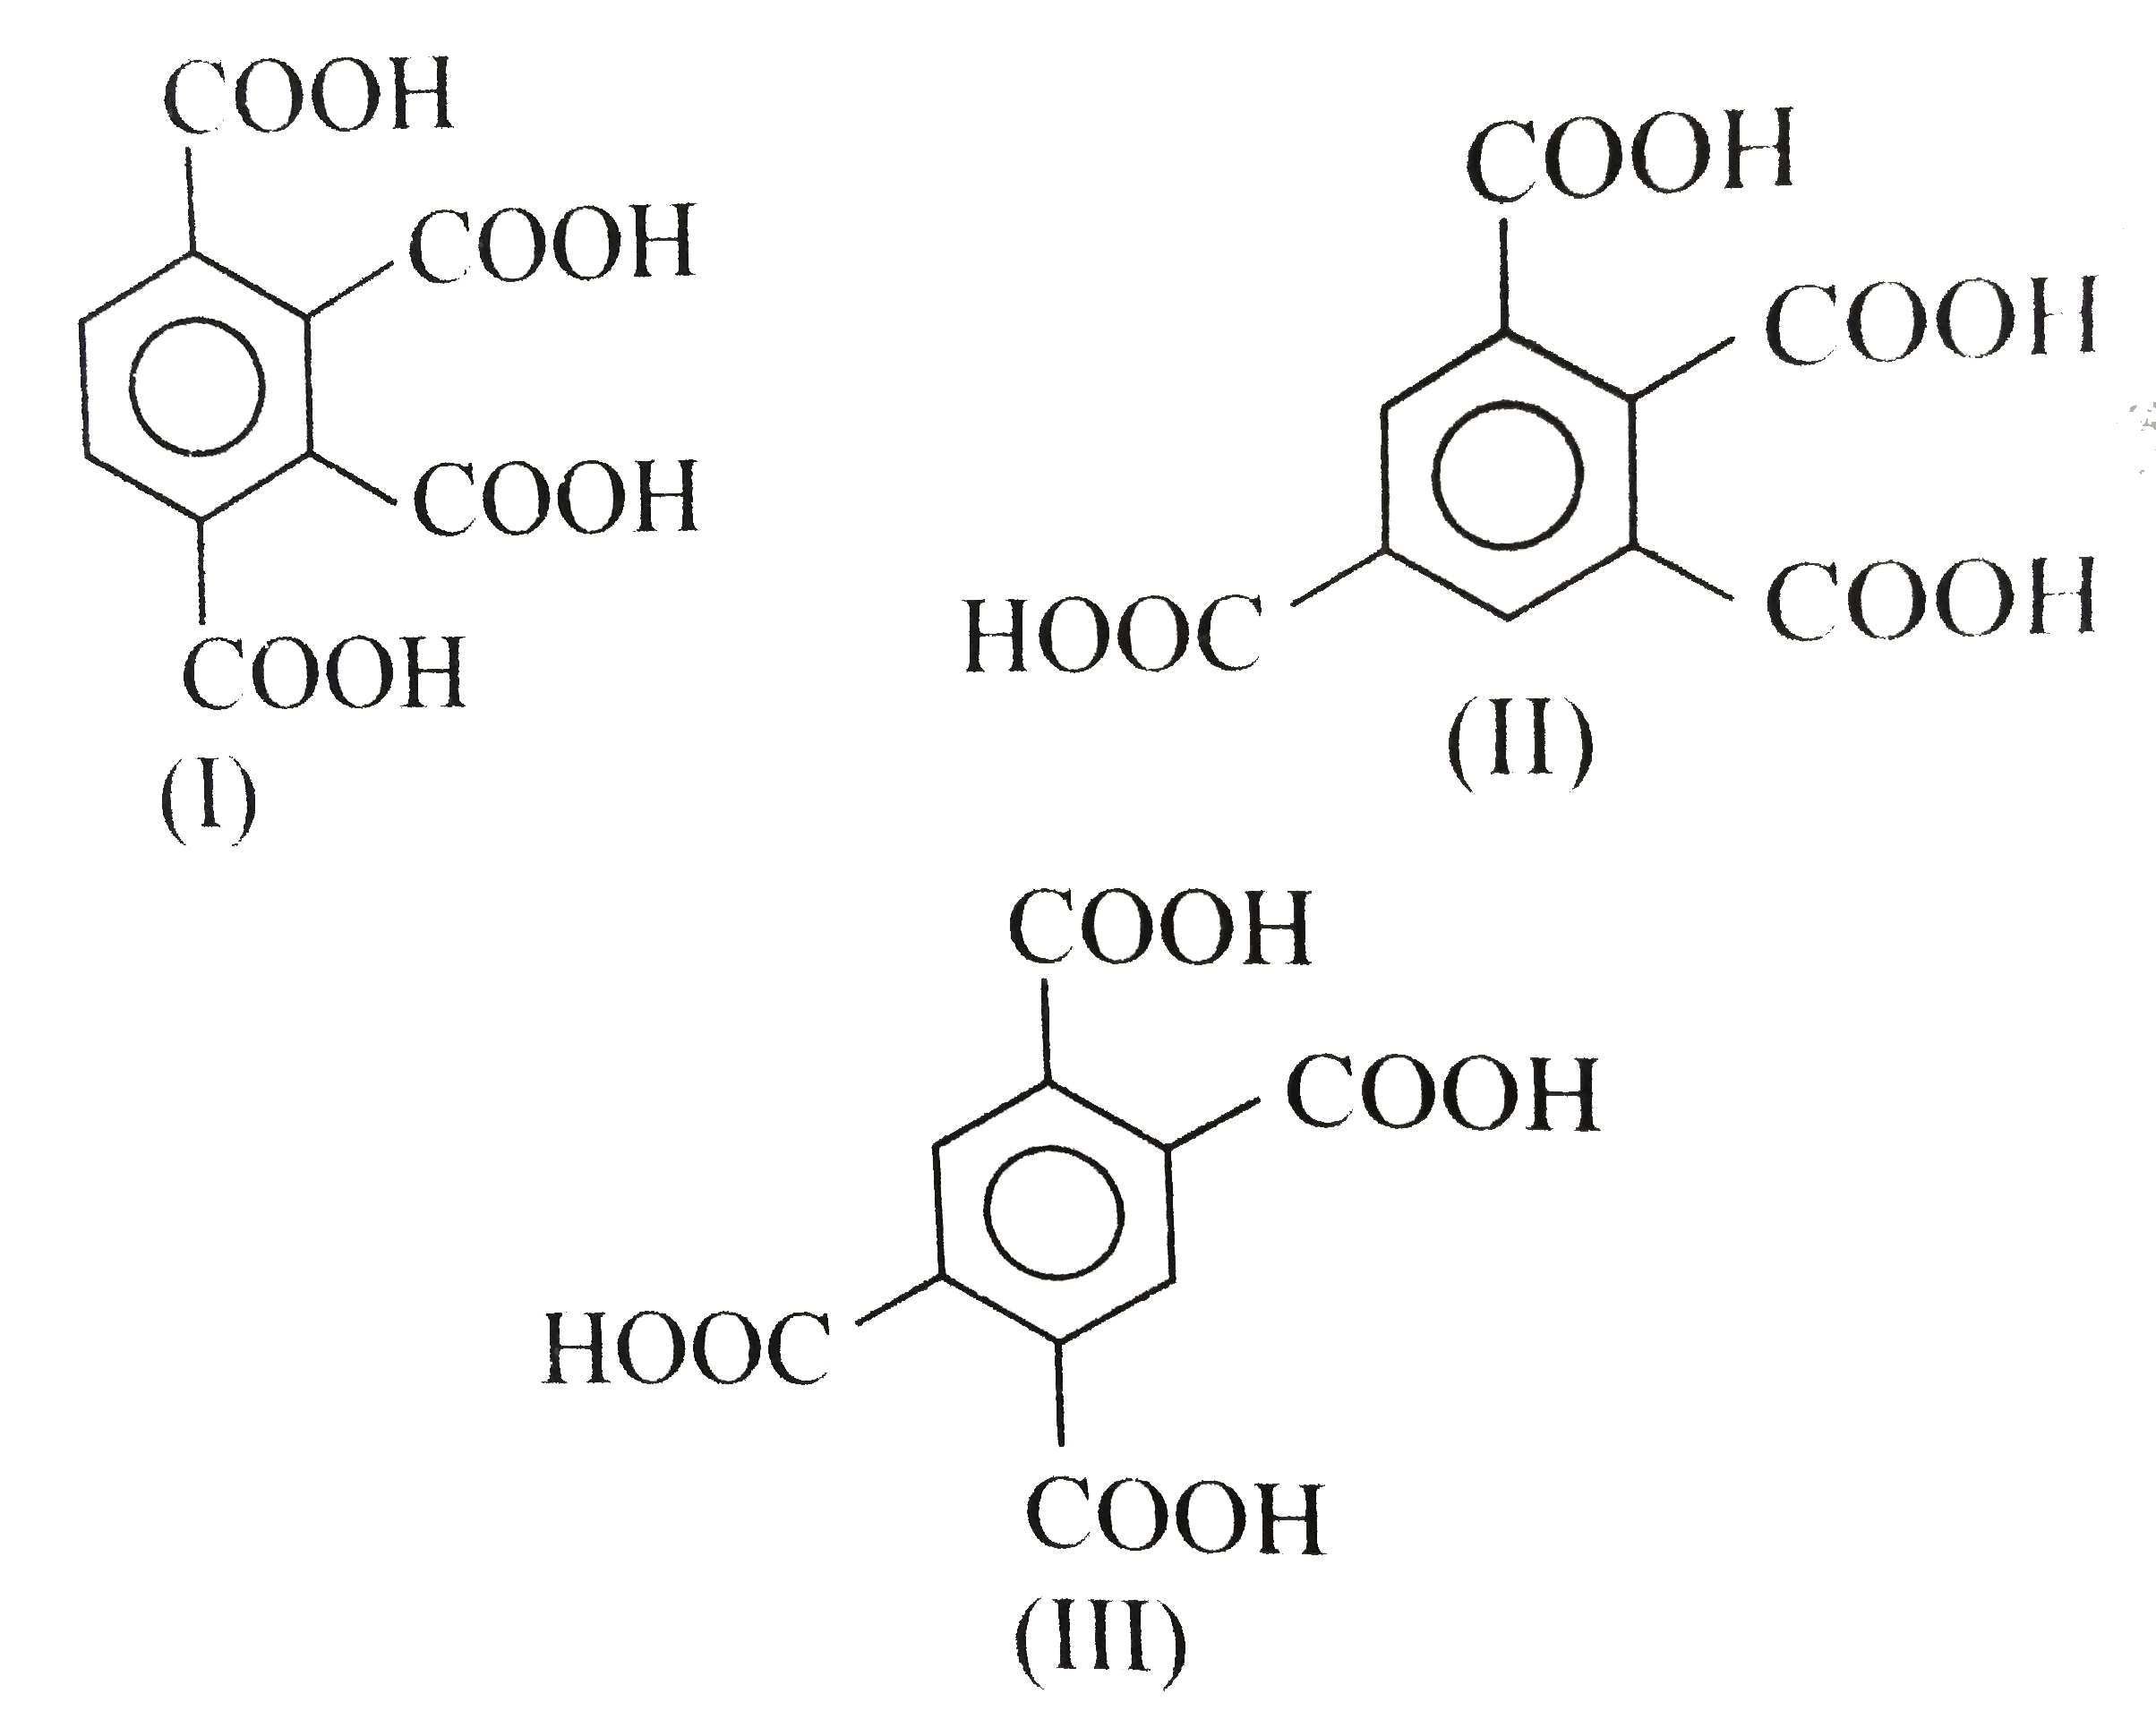 Three isomeric tetracarboxylic acids (I),(II), and (III) are given.      They can be distinguised by anhydride formation by treating with one equivalent and two equivalents of SOCl2.   Which tetracarboxylic acid on reaction with one equivalent of SOCl2 gives only one monoaanhydride ?